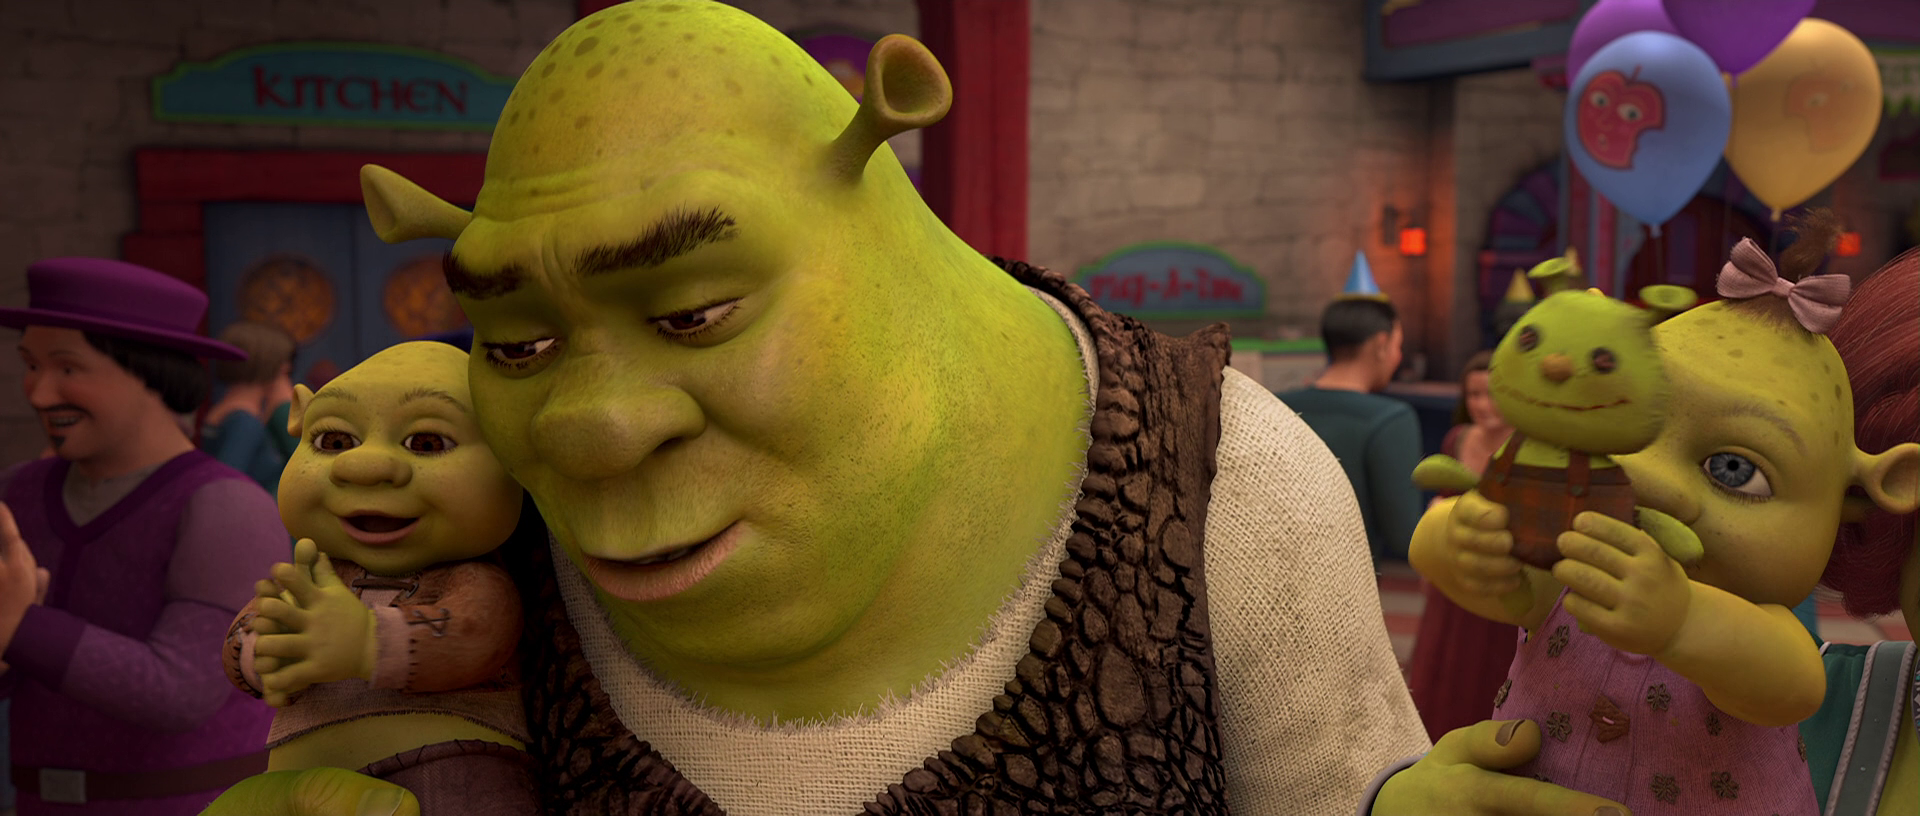 ʷ4 Shrek.Forever.After.2010.1080p.BluRay.x264.DTS-FGT 7.16GB-3.png